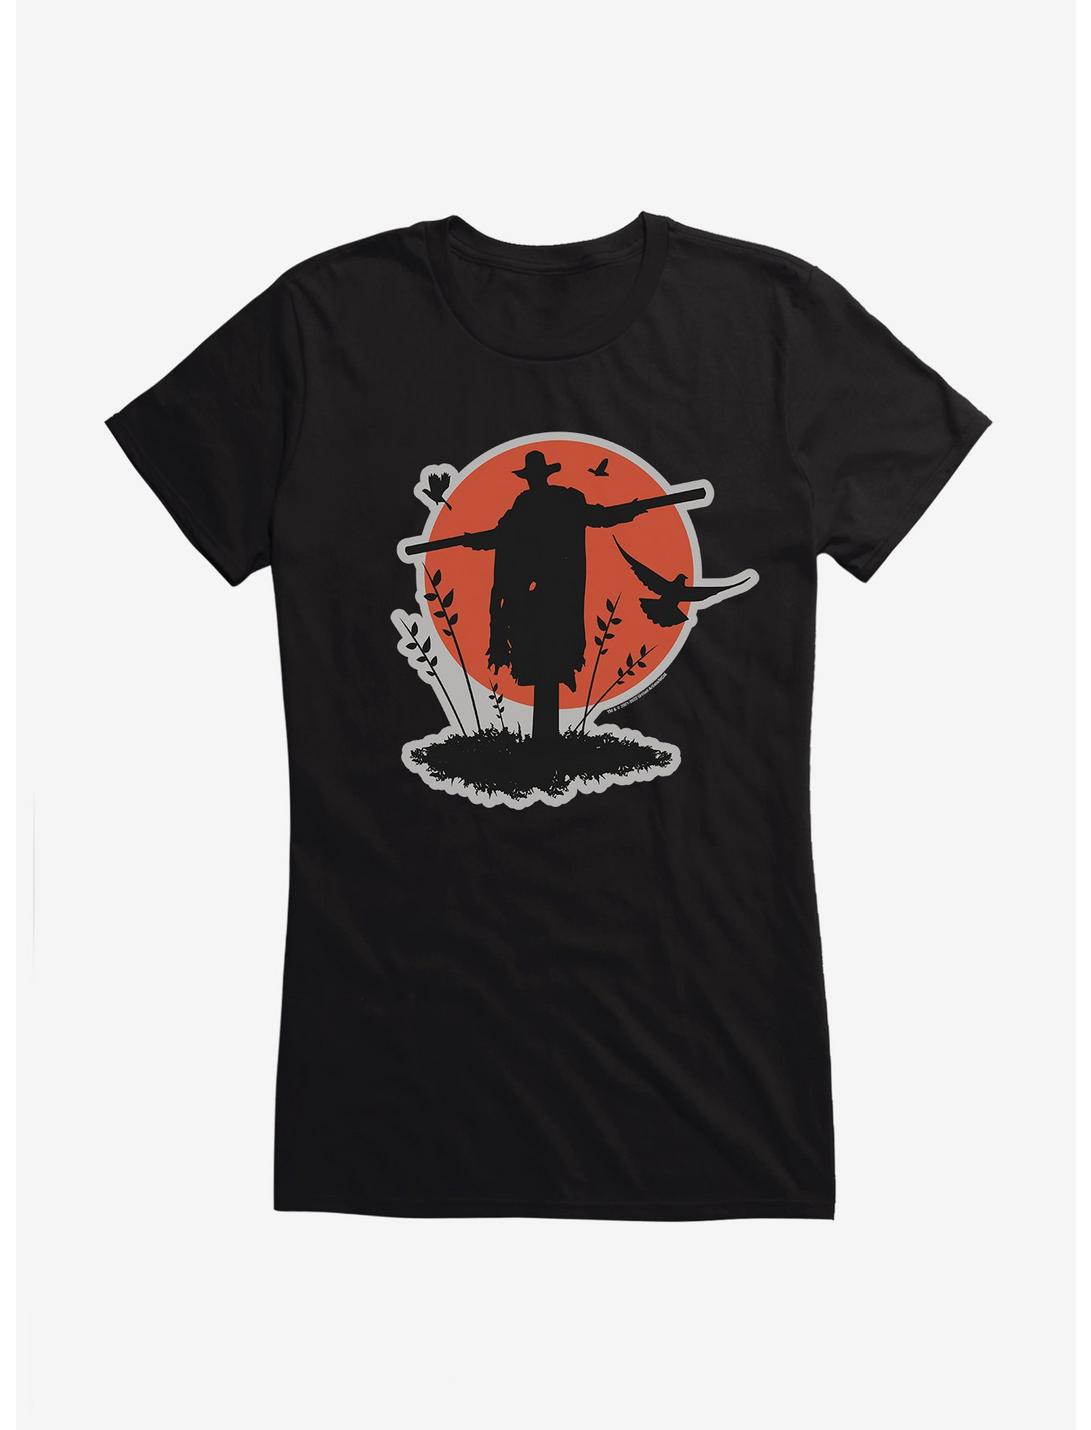 Jeepers Creepers Scarecrow Moon Girls T-Shirt, BLACK, hi-res